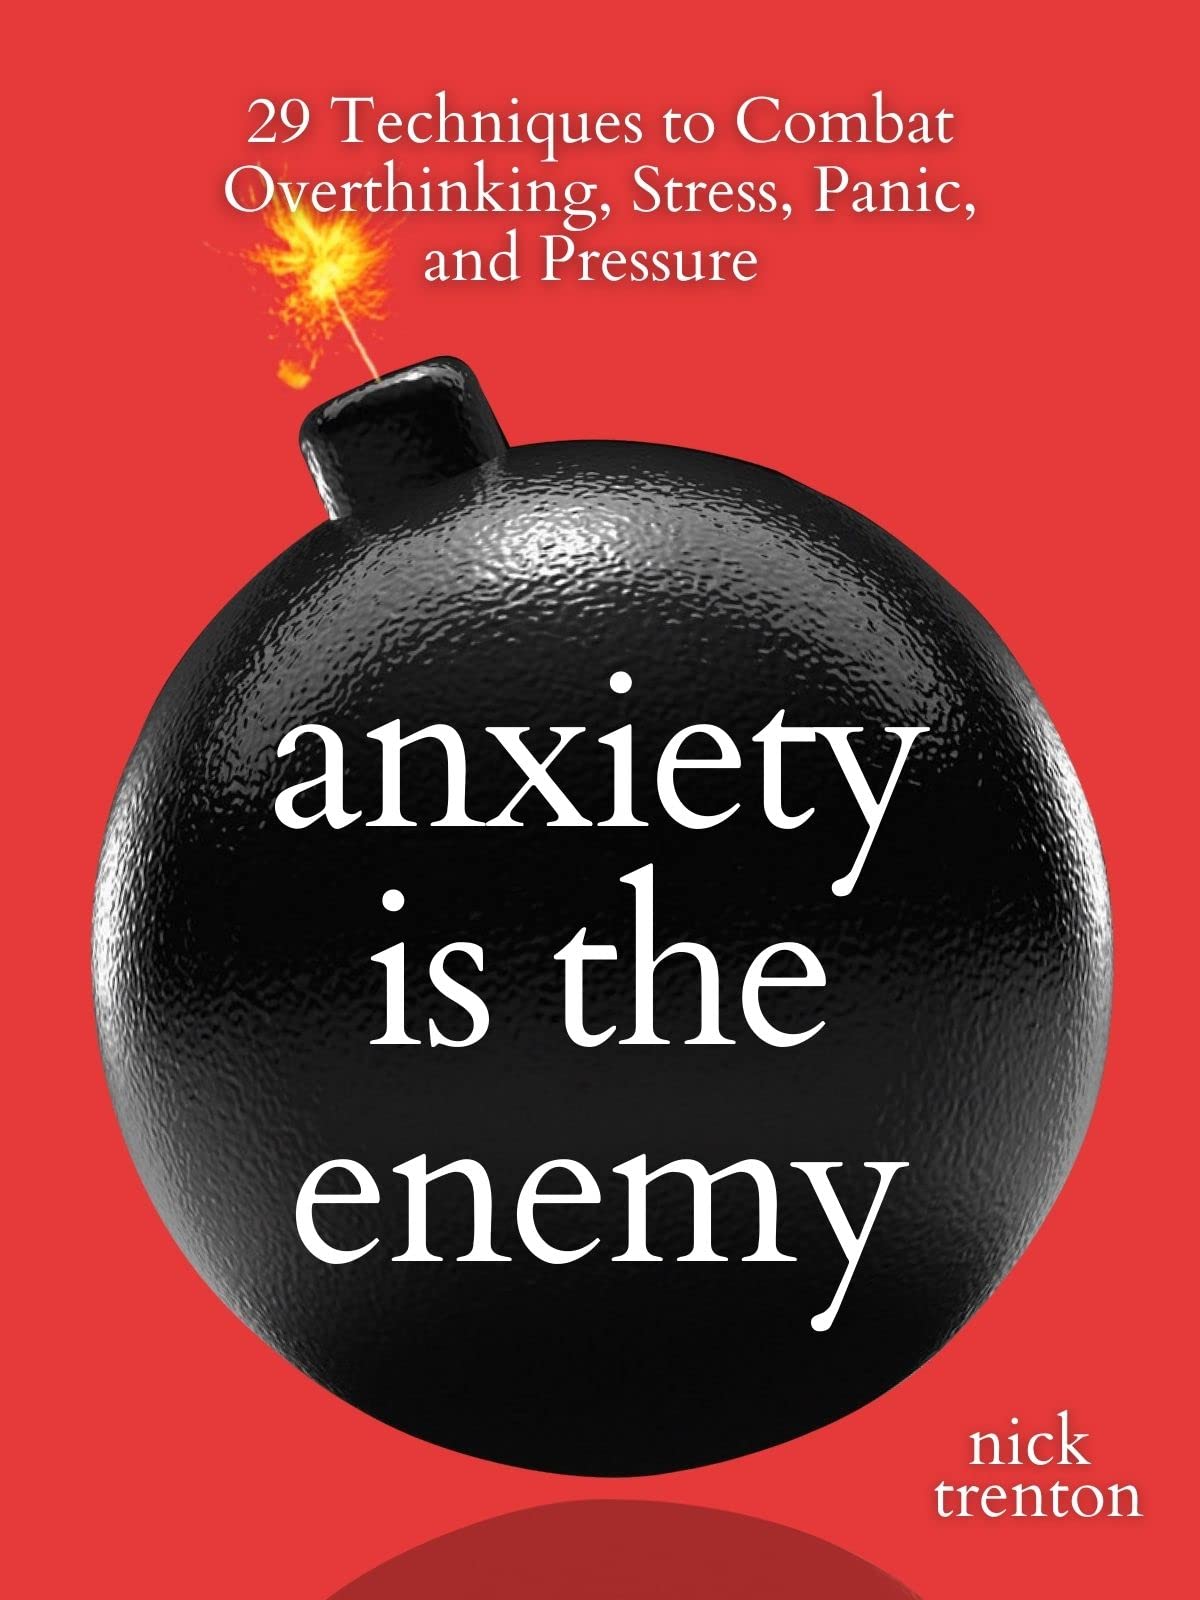 Anxiety is the Enemy: 29 Techniques to Combat Overthinking, Stress, Panic, and Pressure (The Path to Calm Book 5)